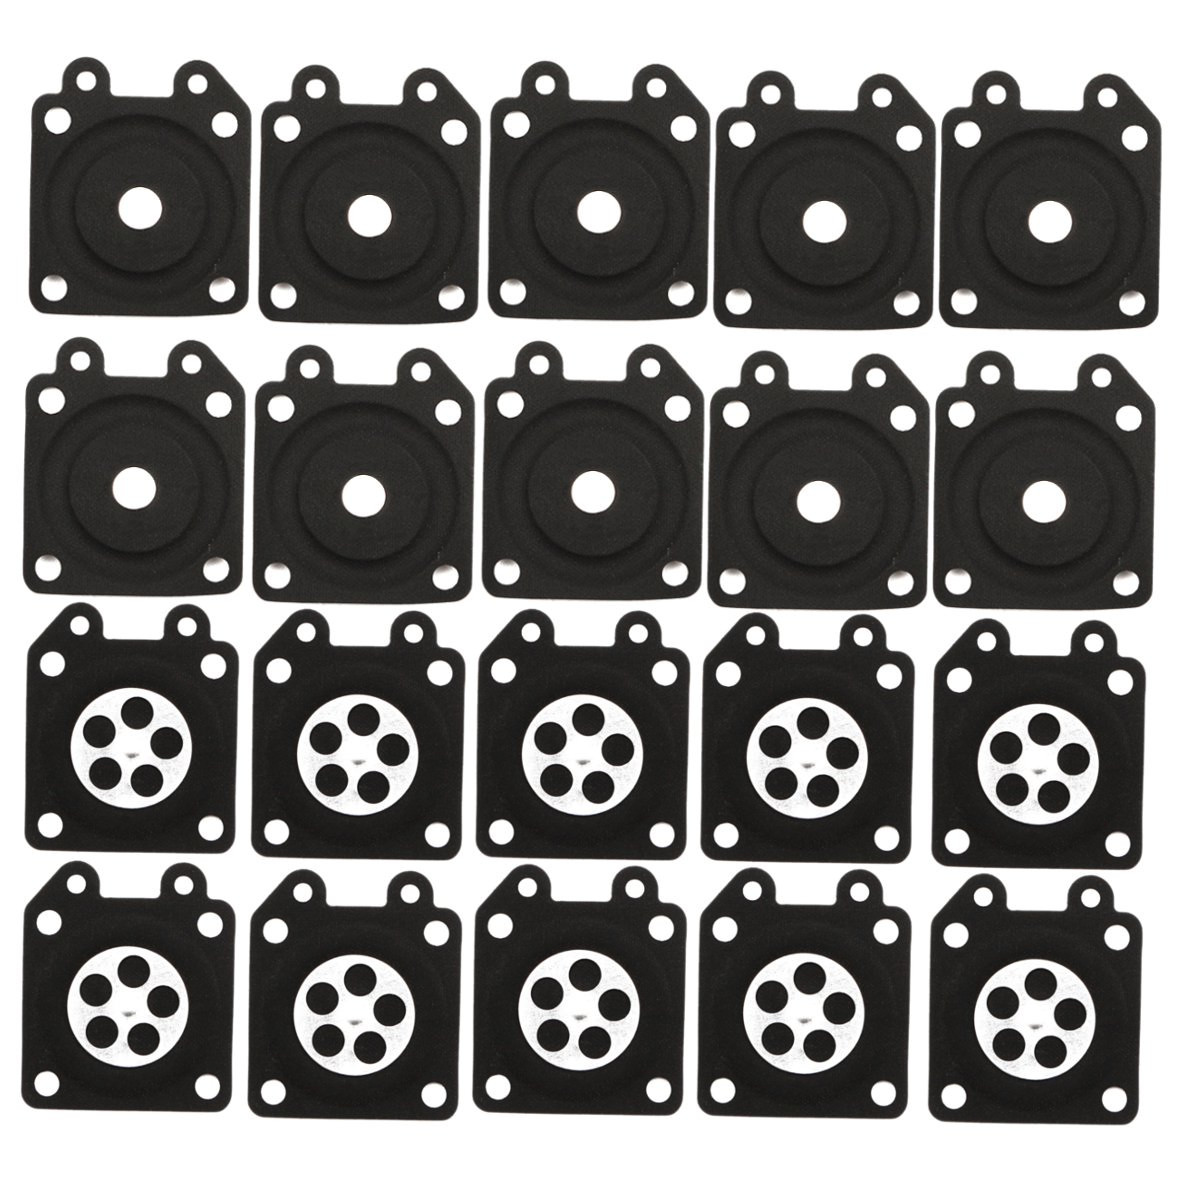 20pcs Gardening Chainsaw Metering Diaphragm Replacement for Walbro